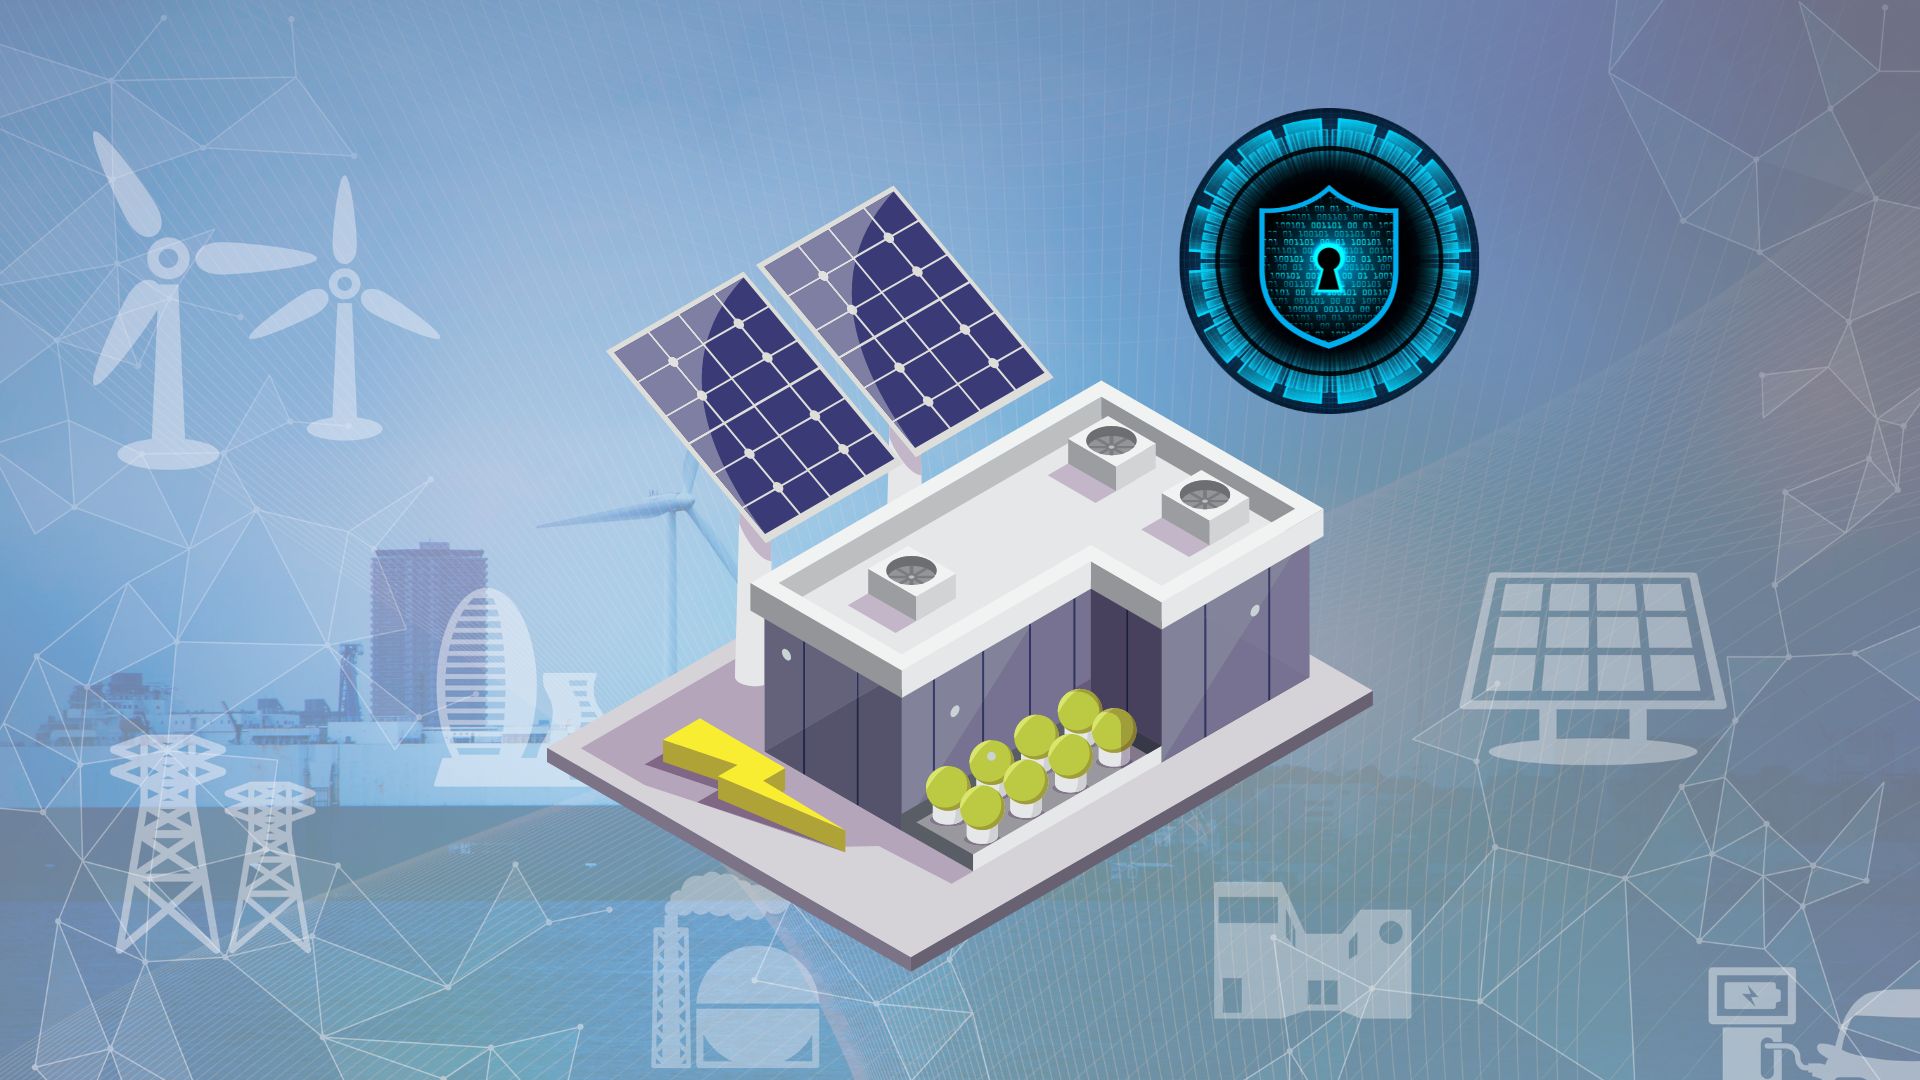 Cybersecurity Risks in Smart Grids